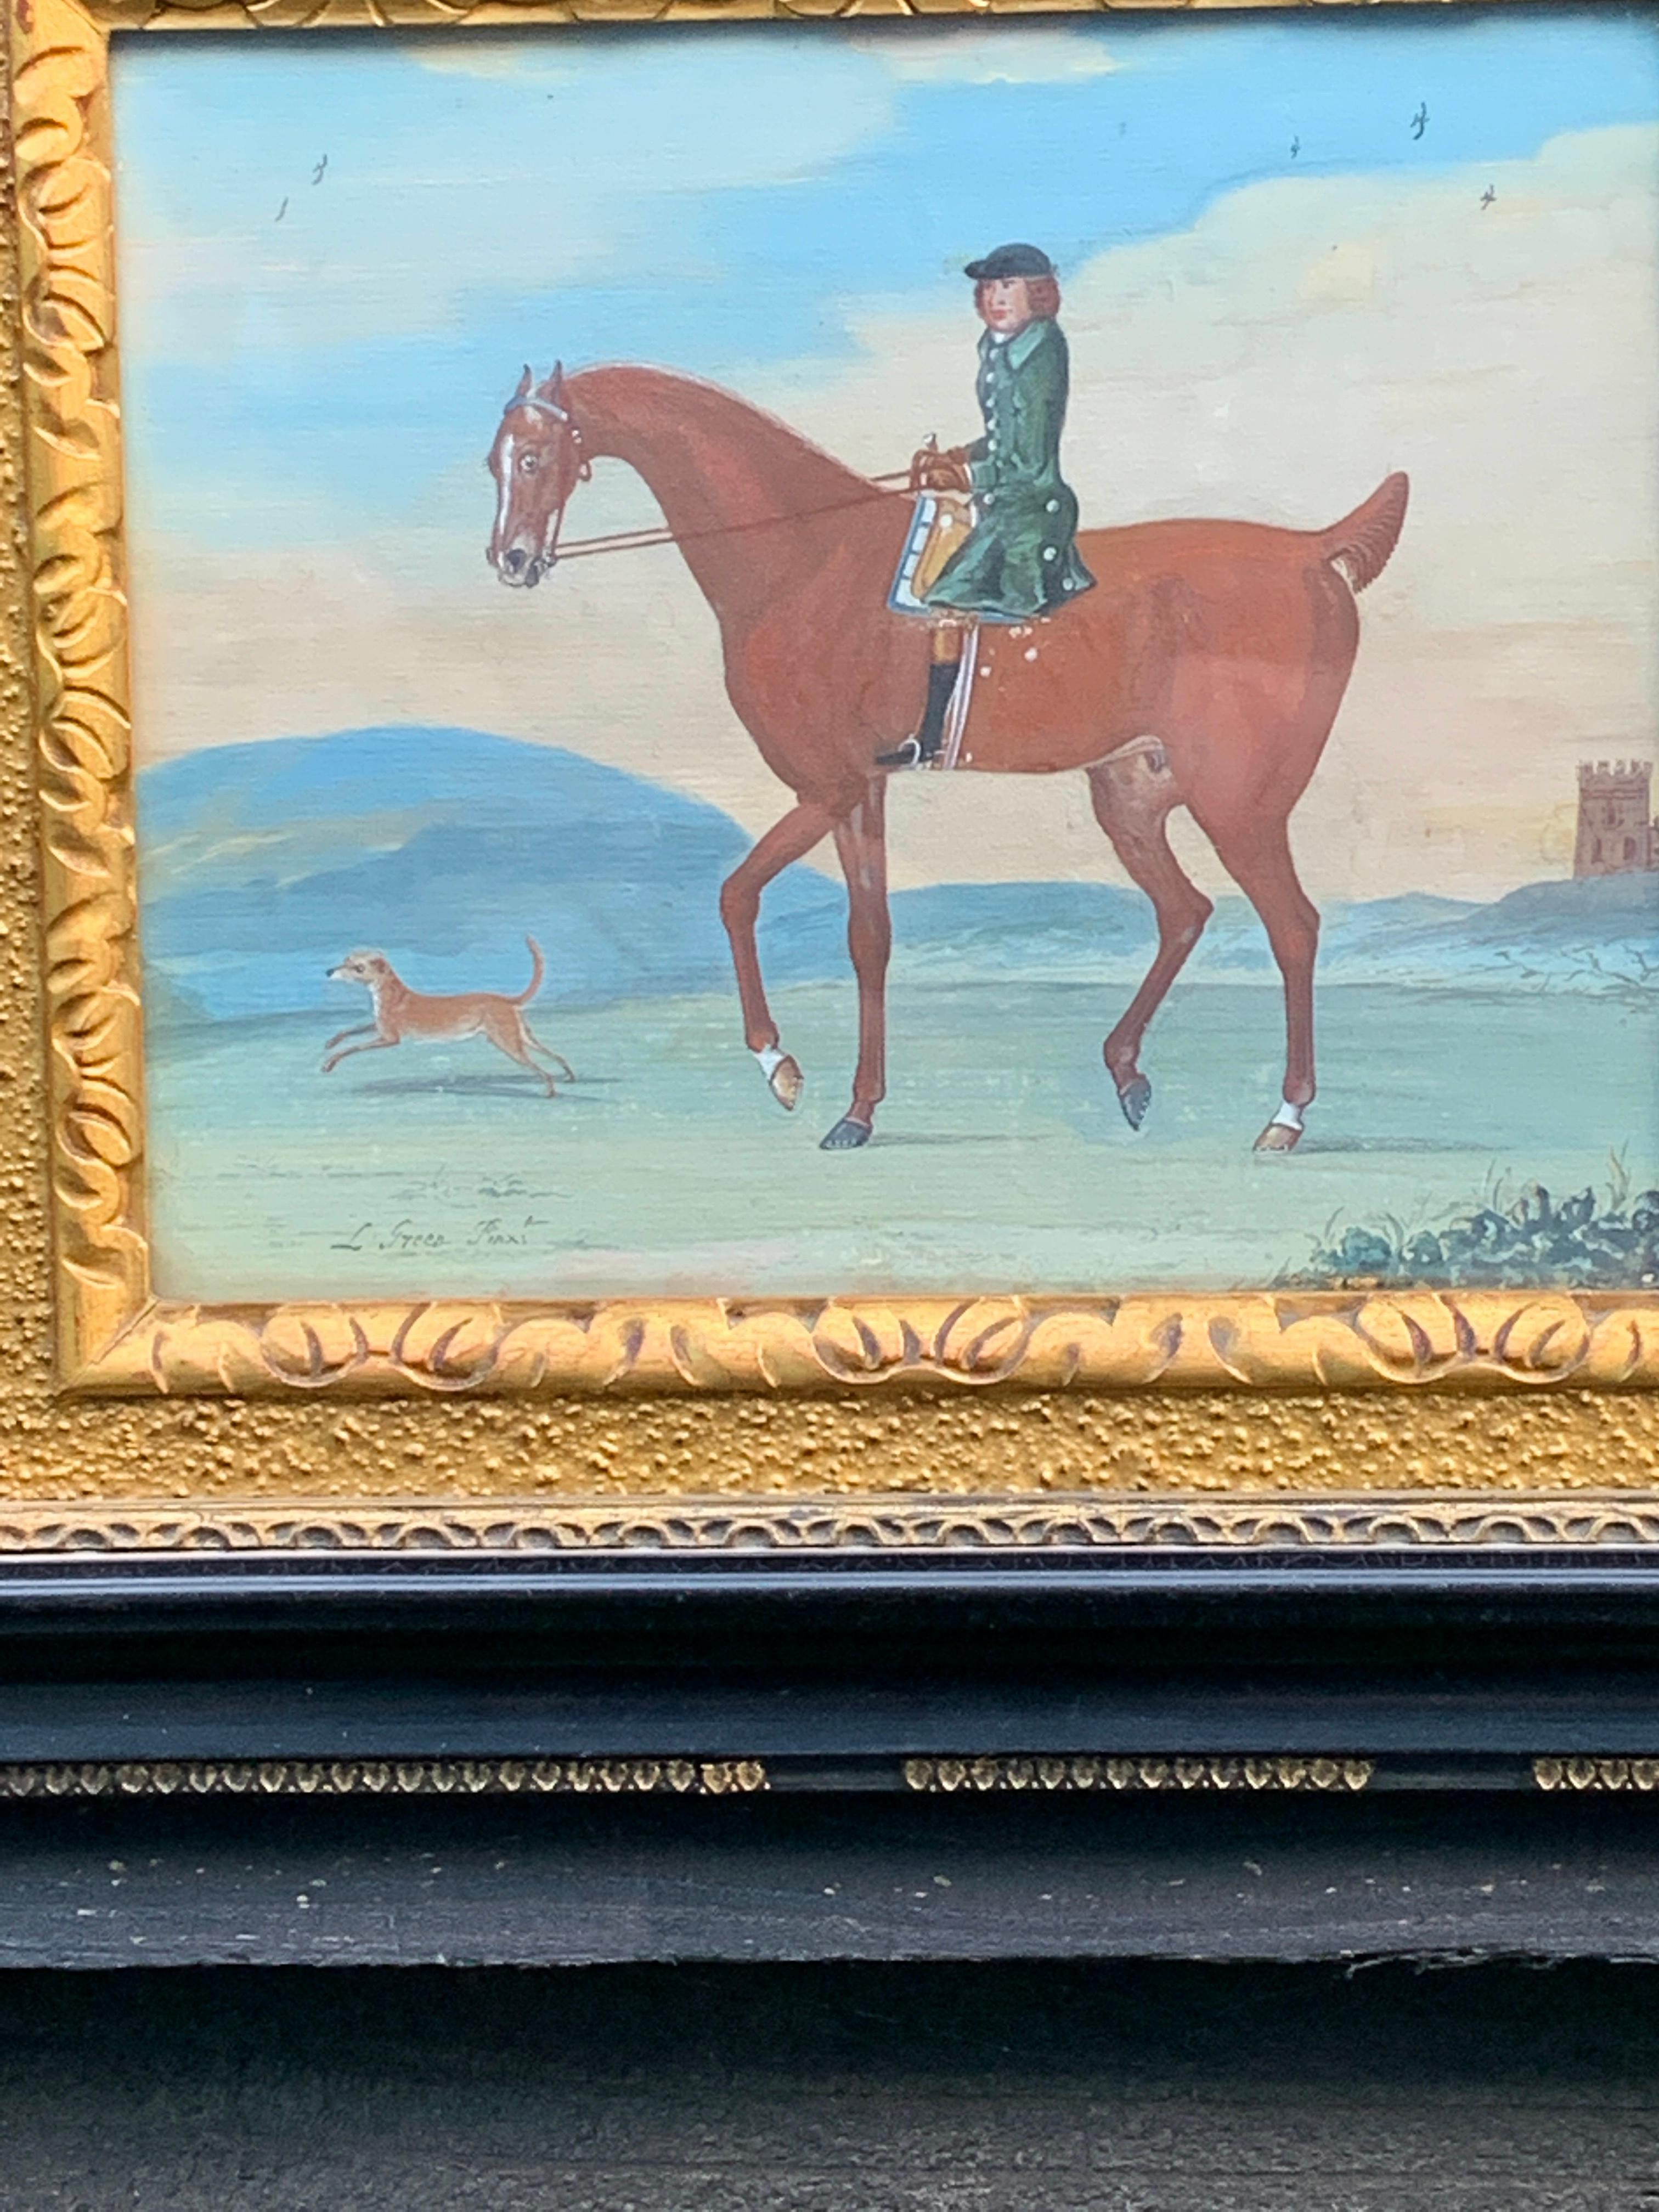 18th century English scene of a man on his horse with his dog in a landscape - Art by L.Green